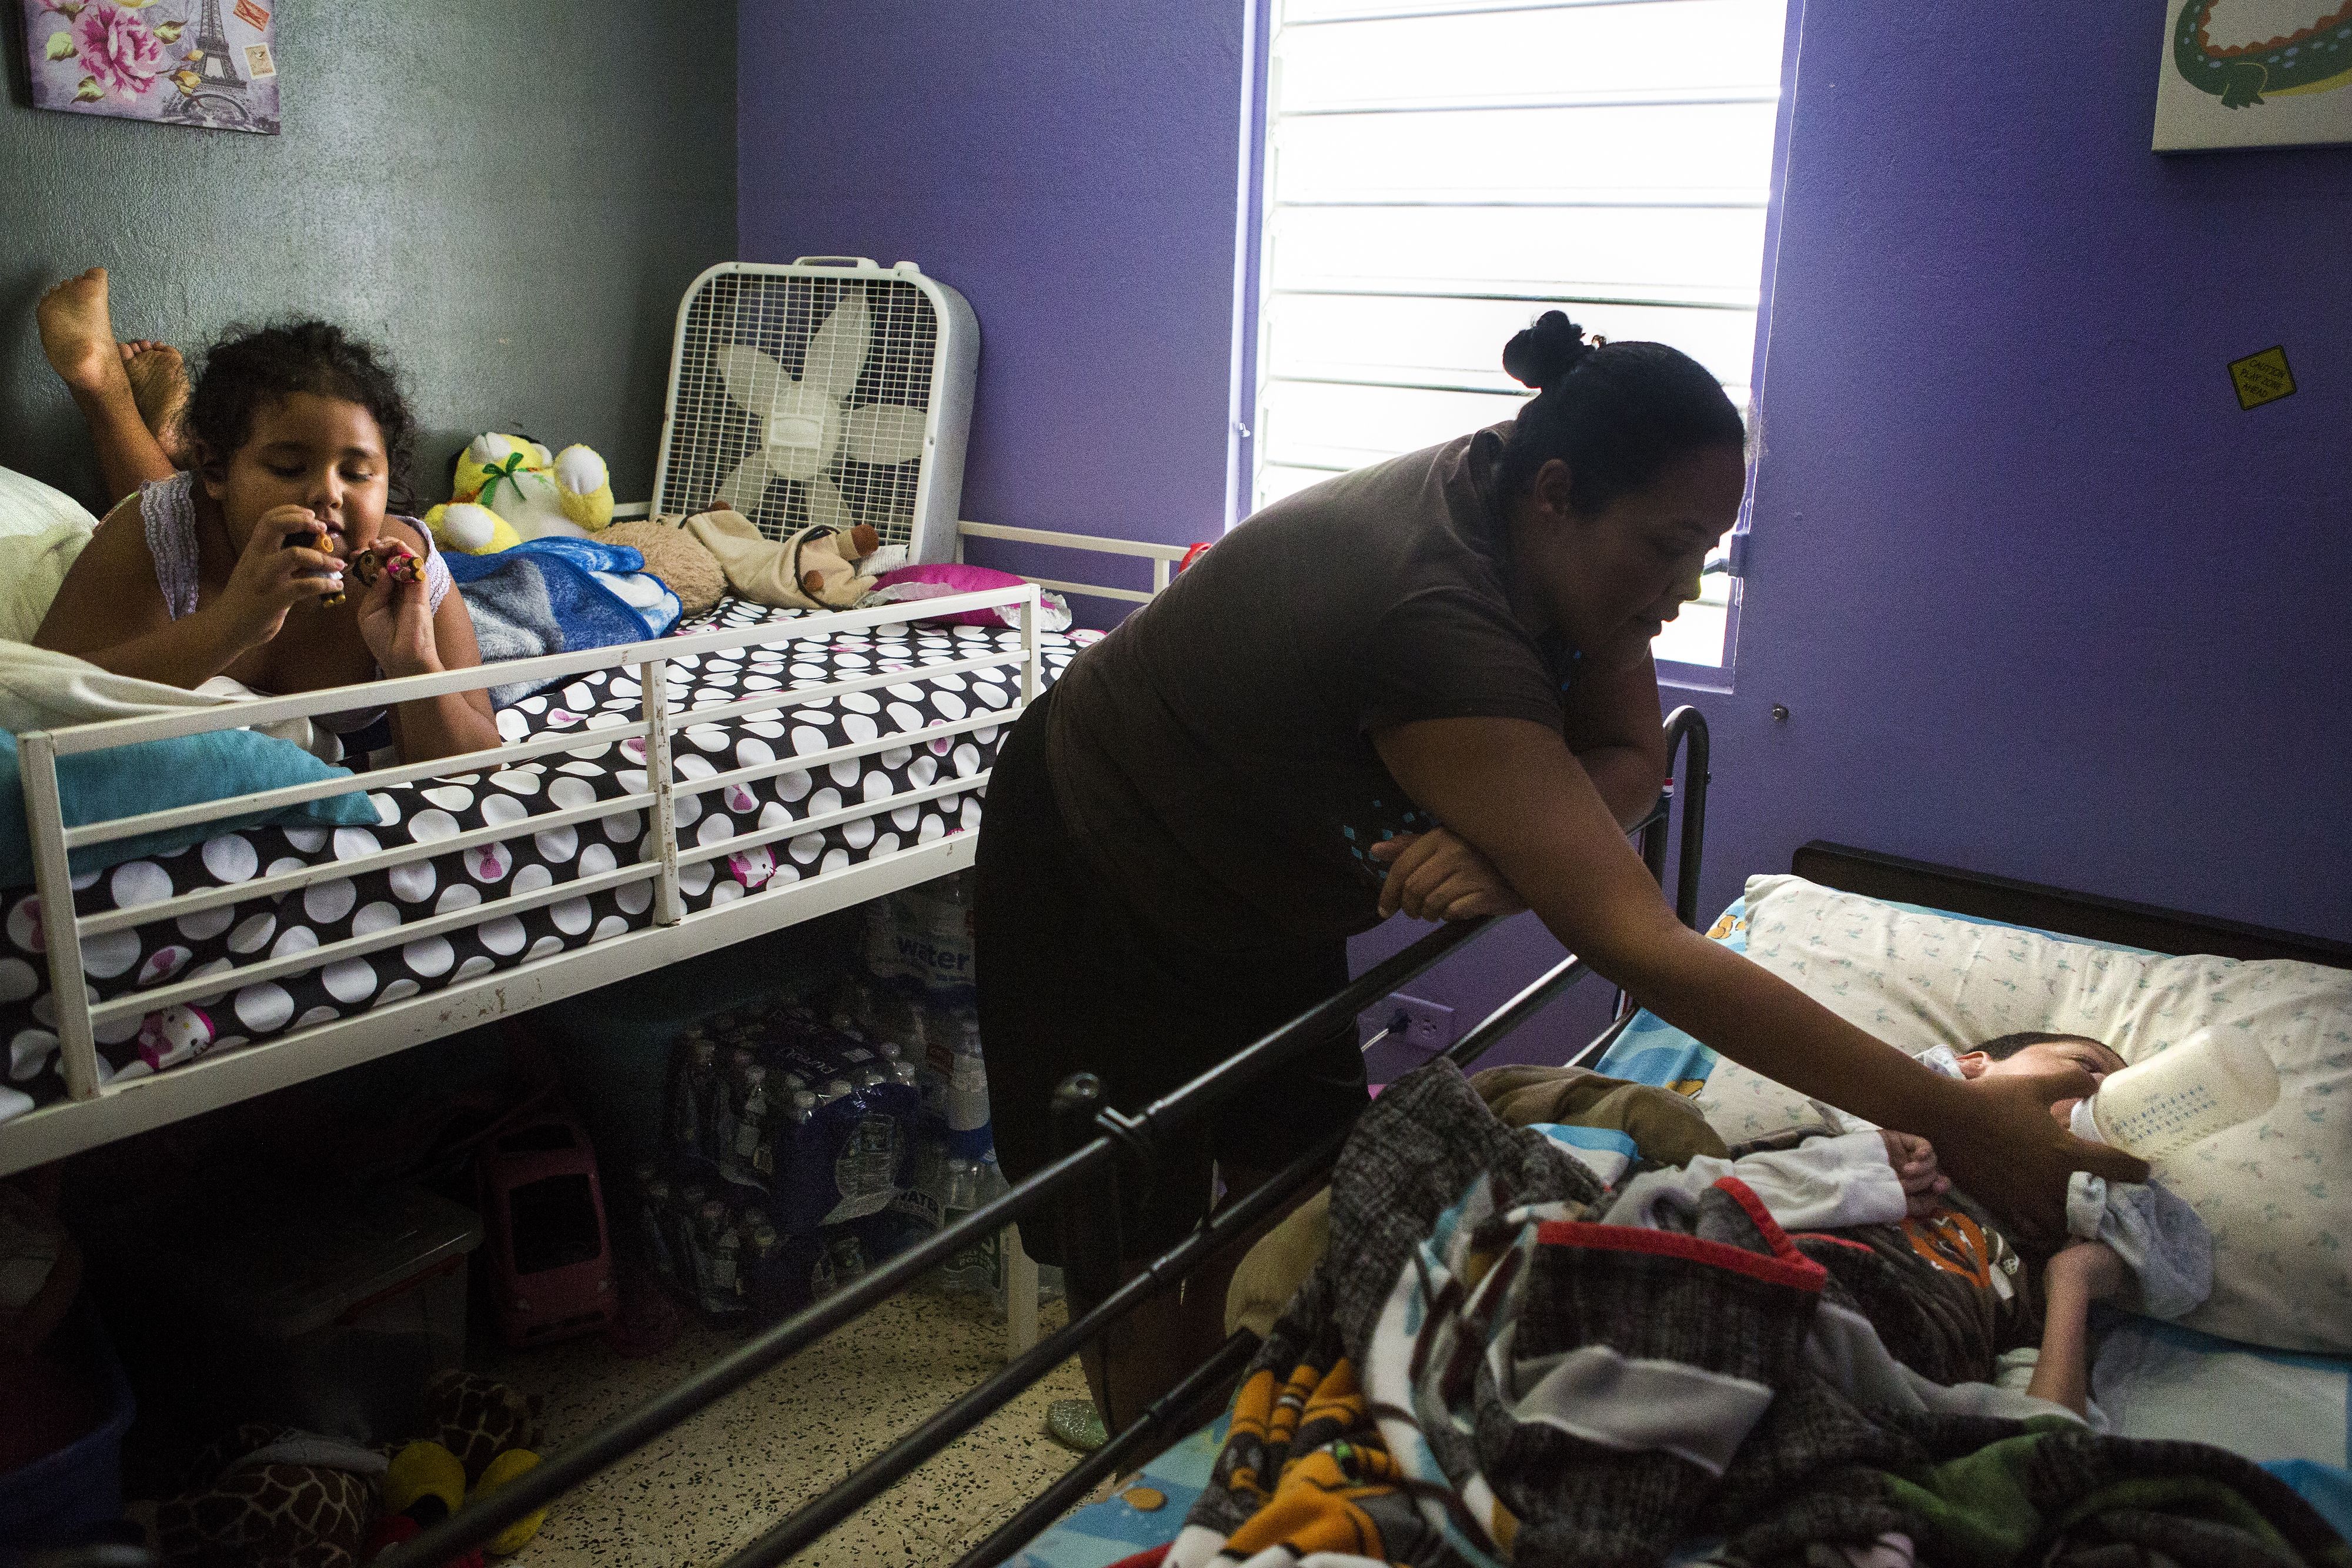 Karen Feliciano, center, feeds her oldest child, Kenny, 18, who suffers from a number of neurological and physical conditions, while her youngest daughter Kylia, who suffers from autism plays on the bed in their home. “When [Kenny] was born, the doctors said he would only live to six,” Karen said. Image by Ryan Michalesko. Puerto Rico, 2017.